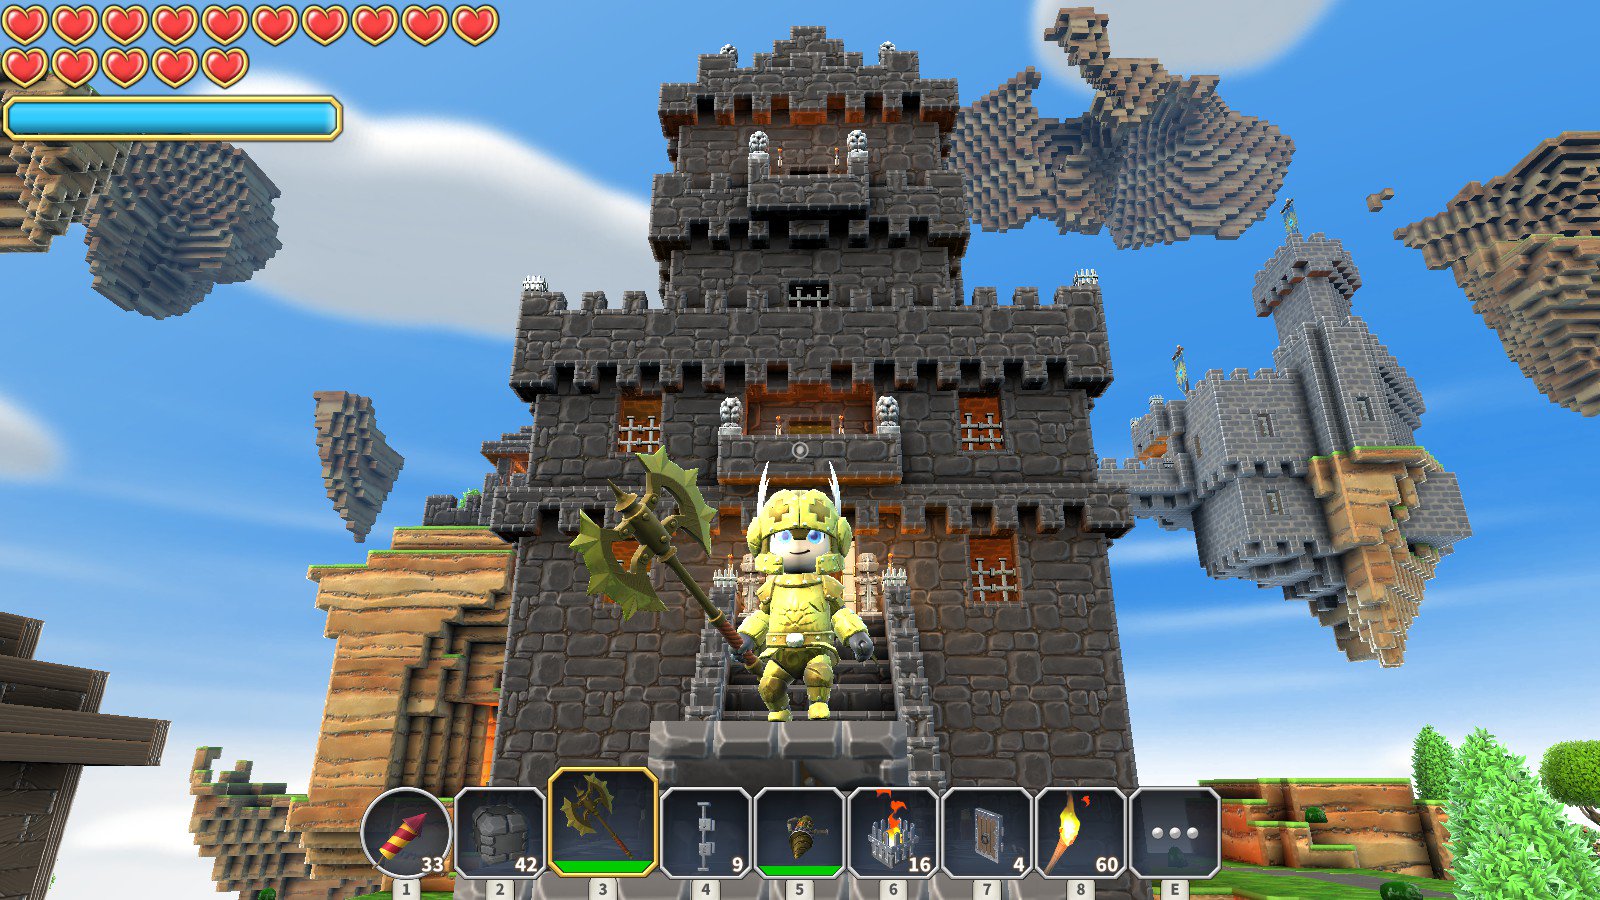 Portal knights auf âfeast your eyes on this incredible build by tobeornottobe check out the castle on one of the island fragments httpstcoatmevptqbâ